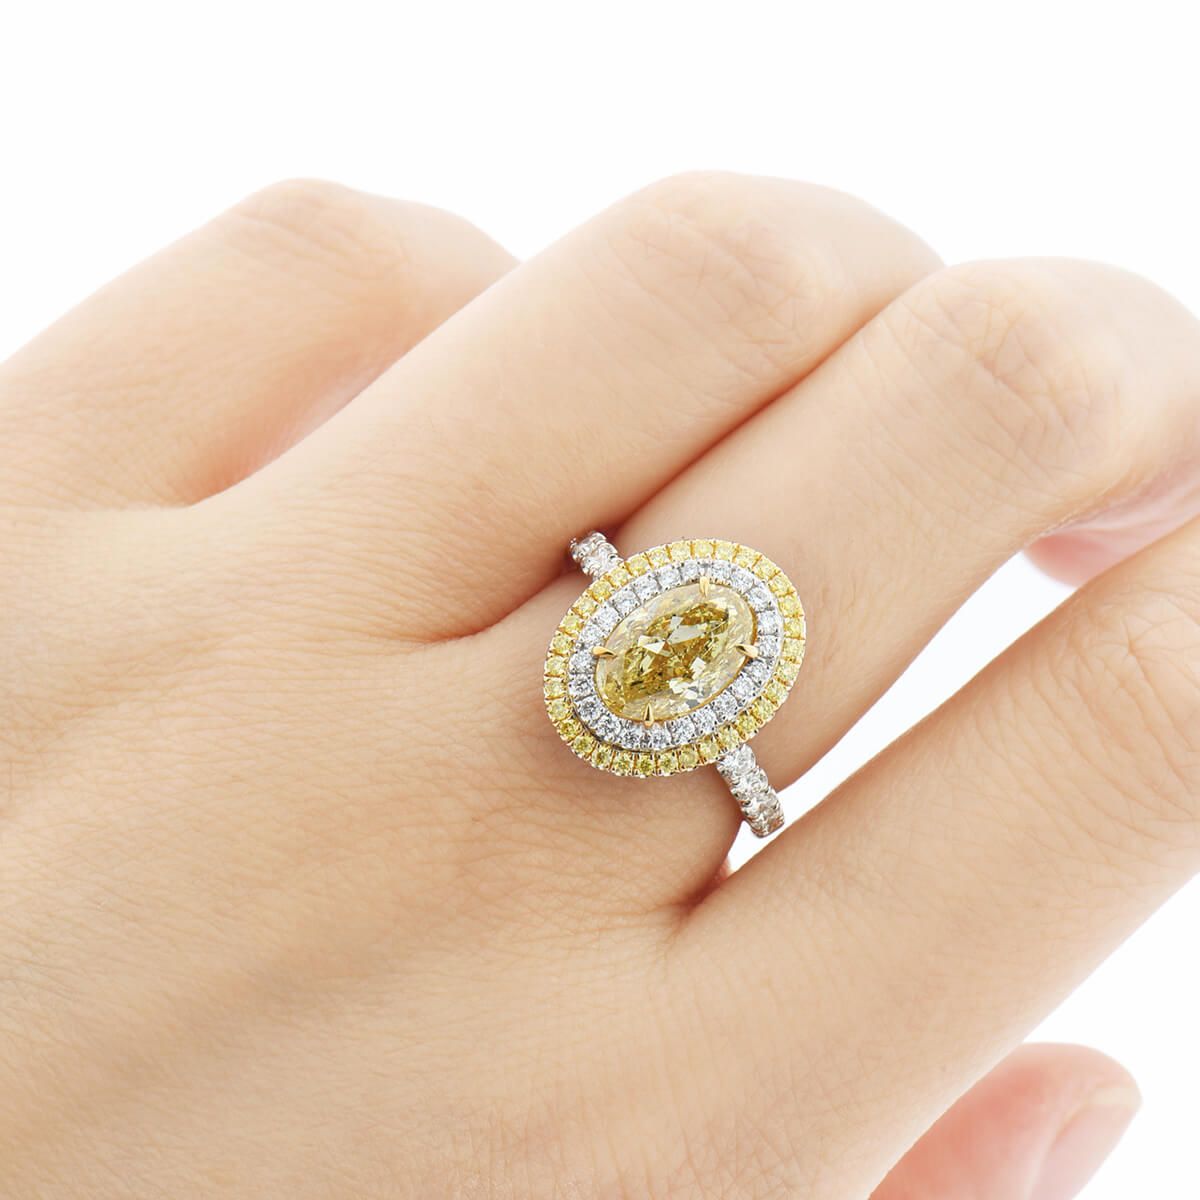 Fancy Yellow Diamond Ring, 2.00 Ct. (2.88 Ct. TW), Oval shape, GIA Certified, 2186382353